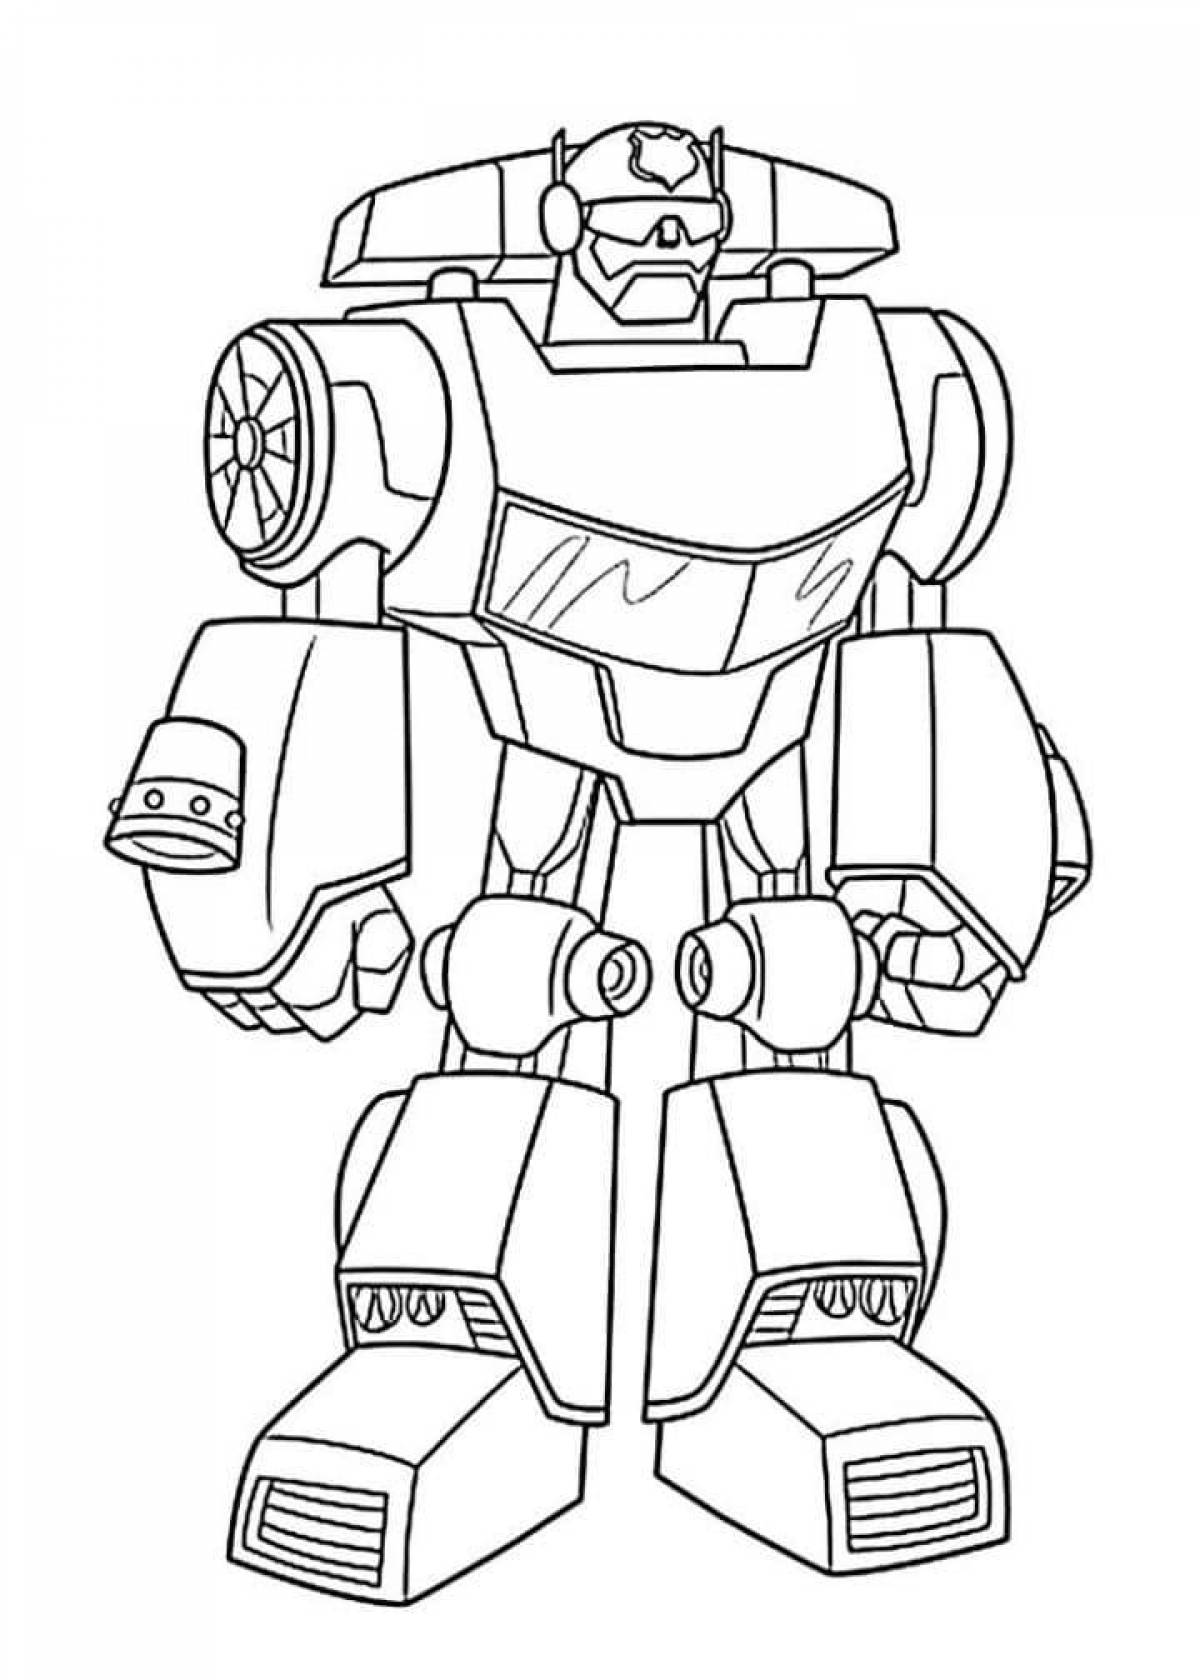 Adorable robot coloring book for 6-7 year olds